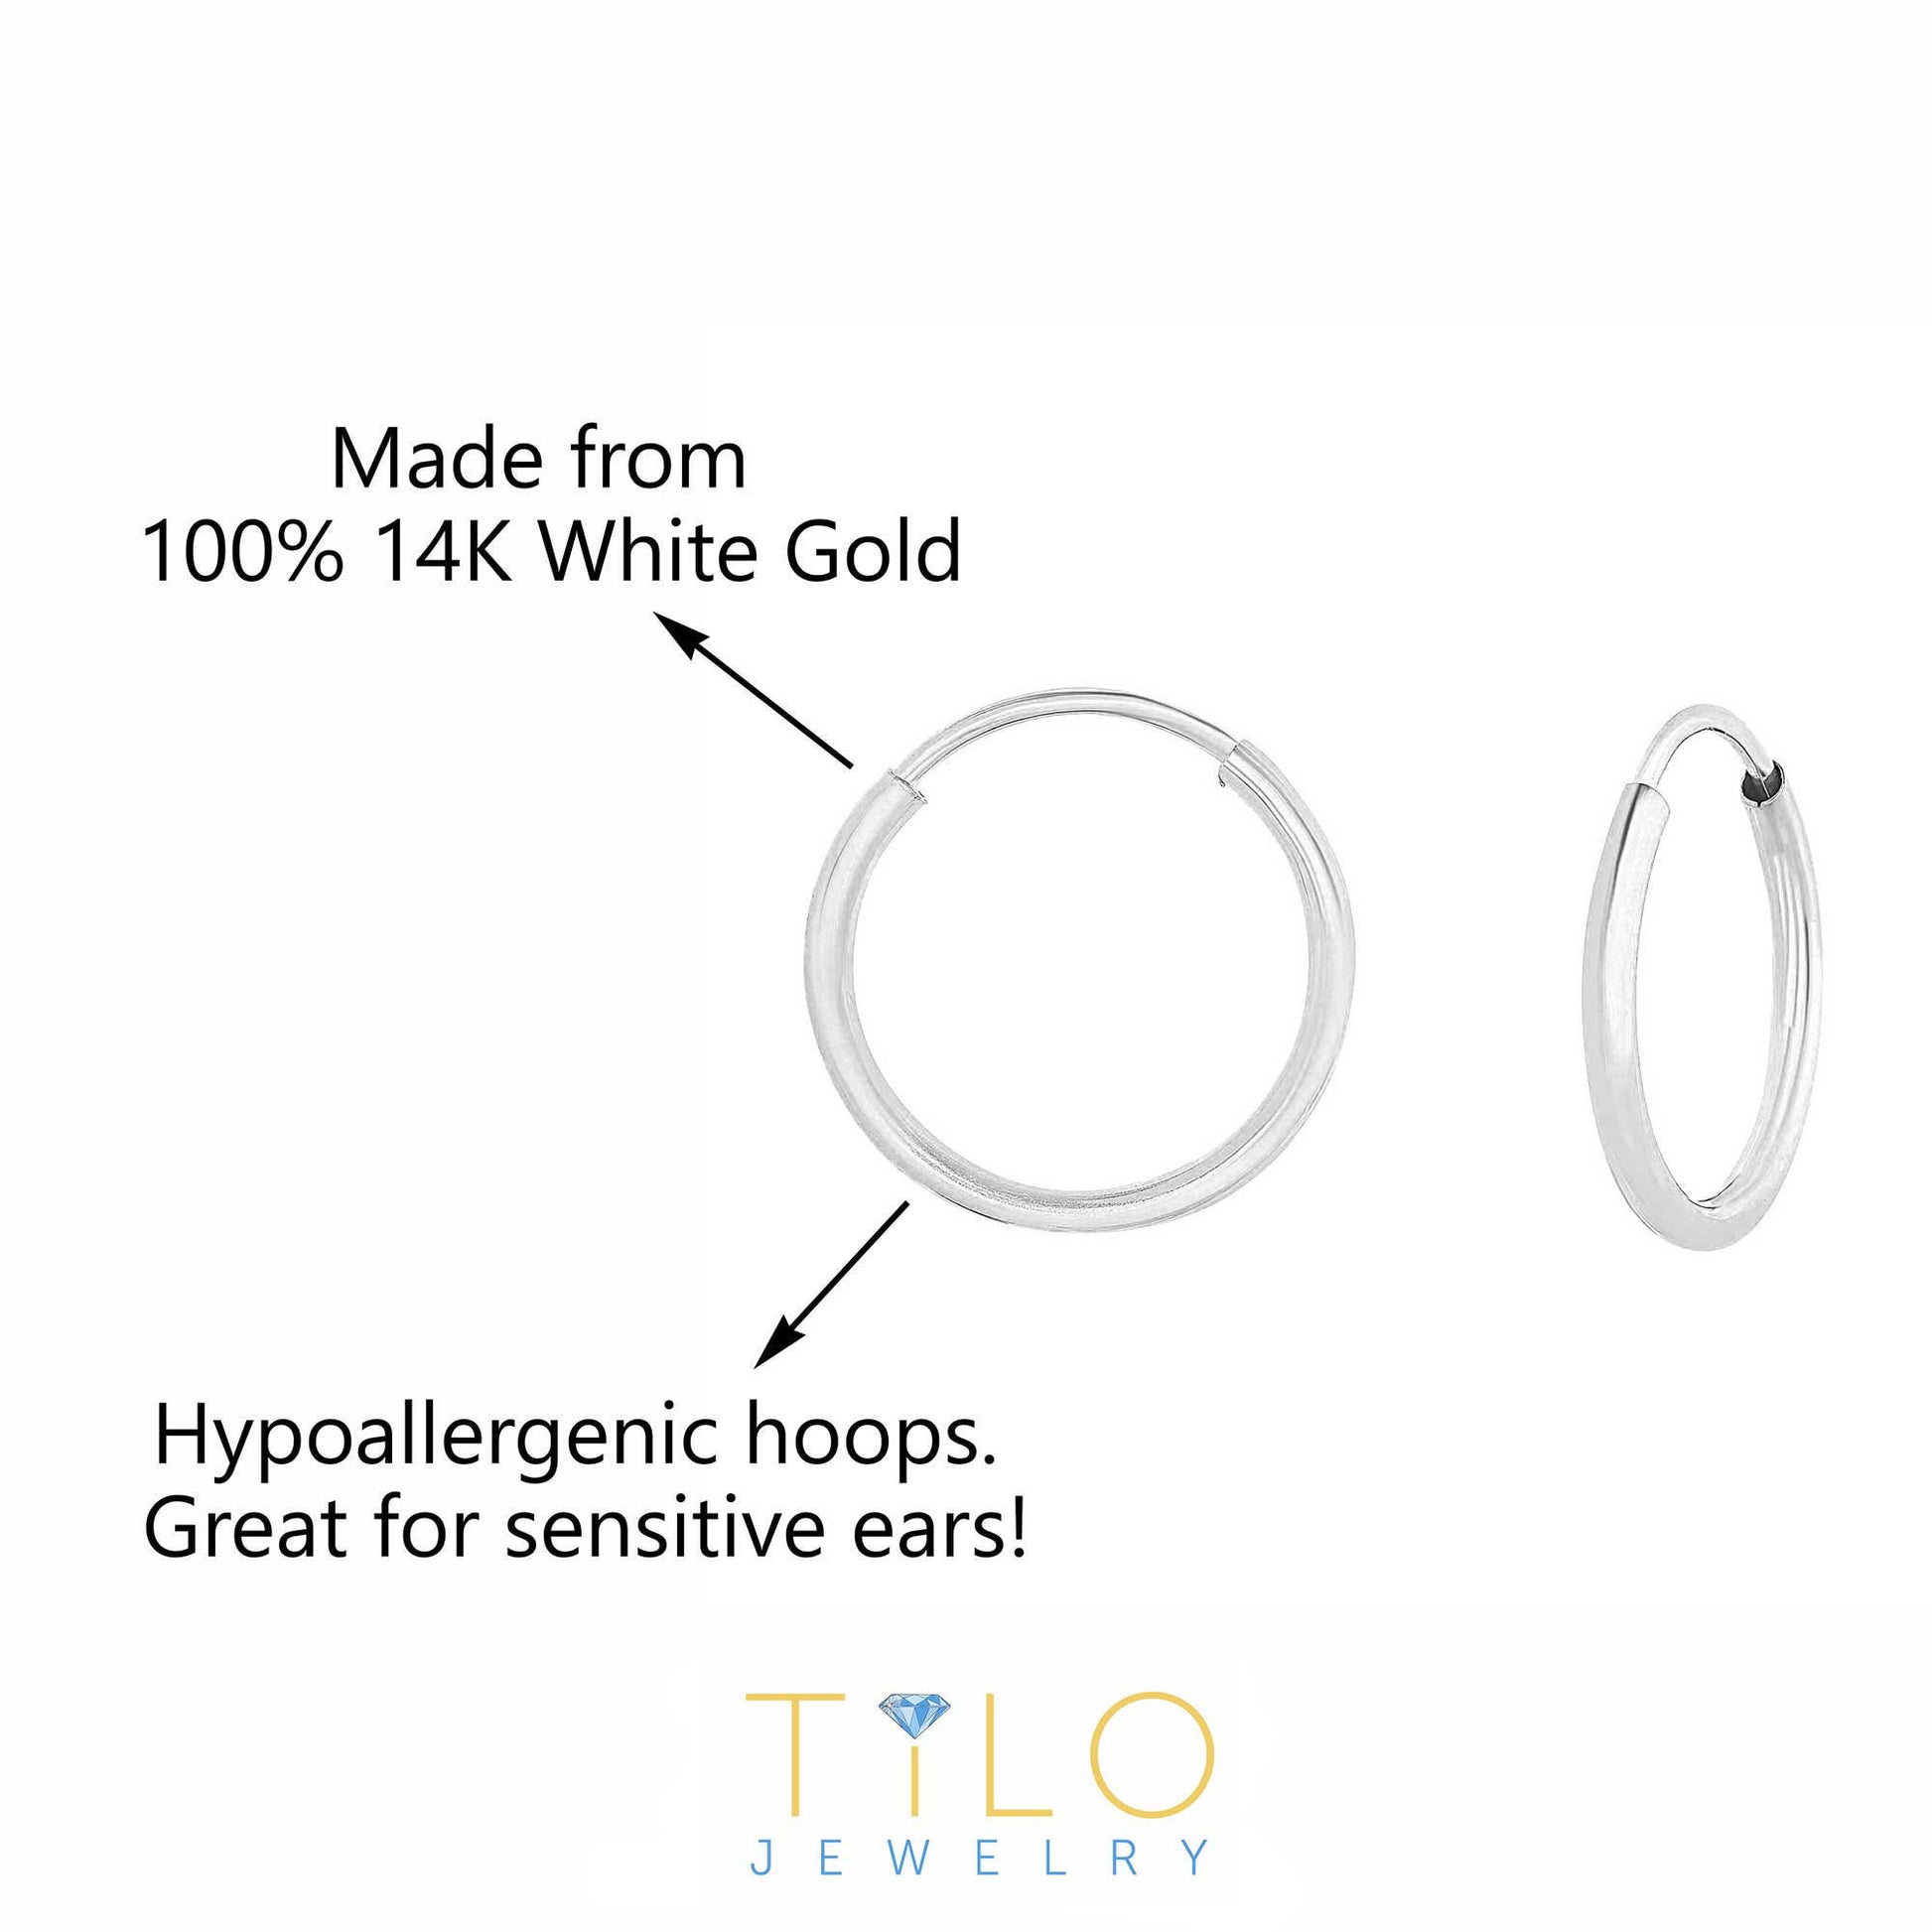 9ct Gold 10mm Sleeper Hoop Earrings with Tiny 9ct White Gold Oval Tags